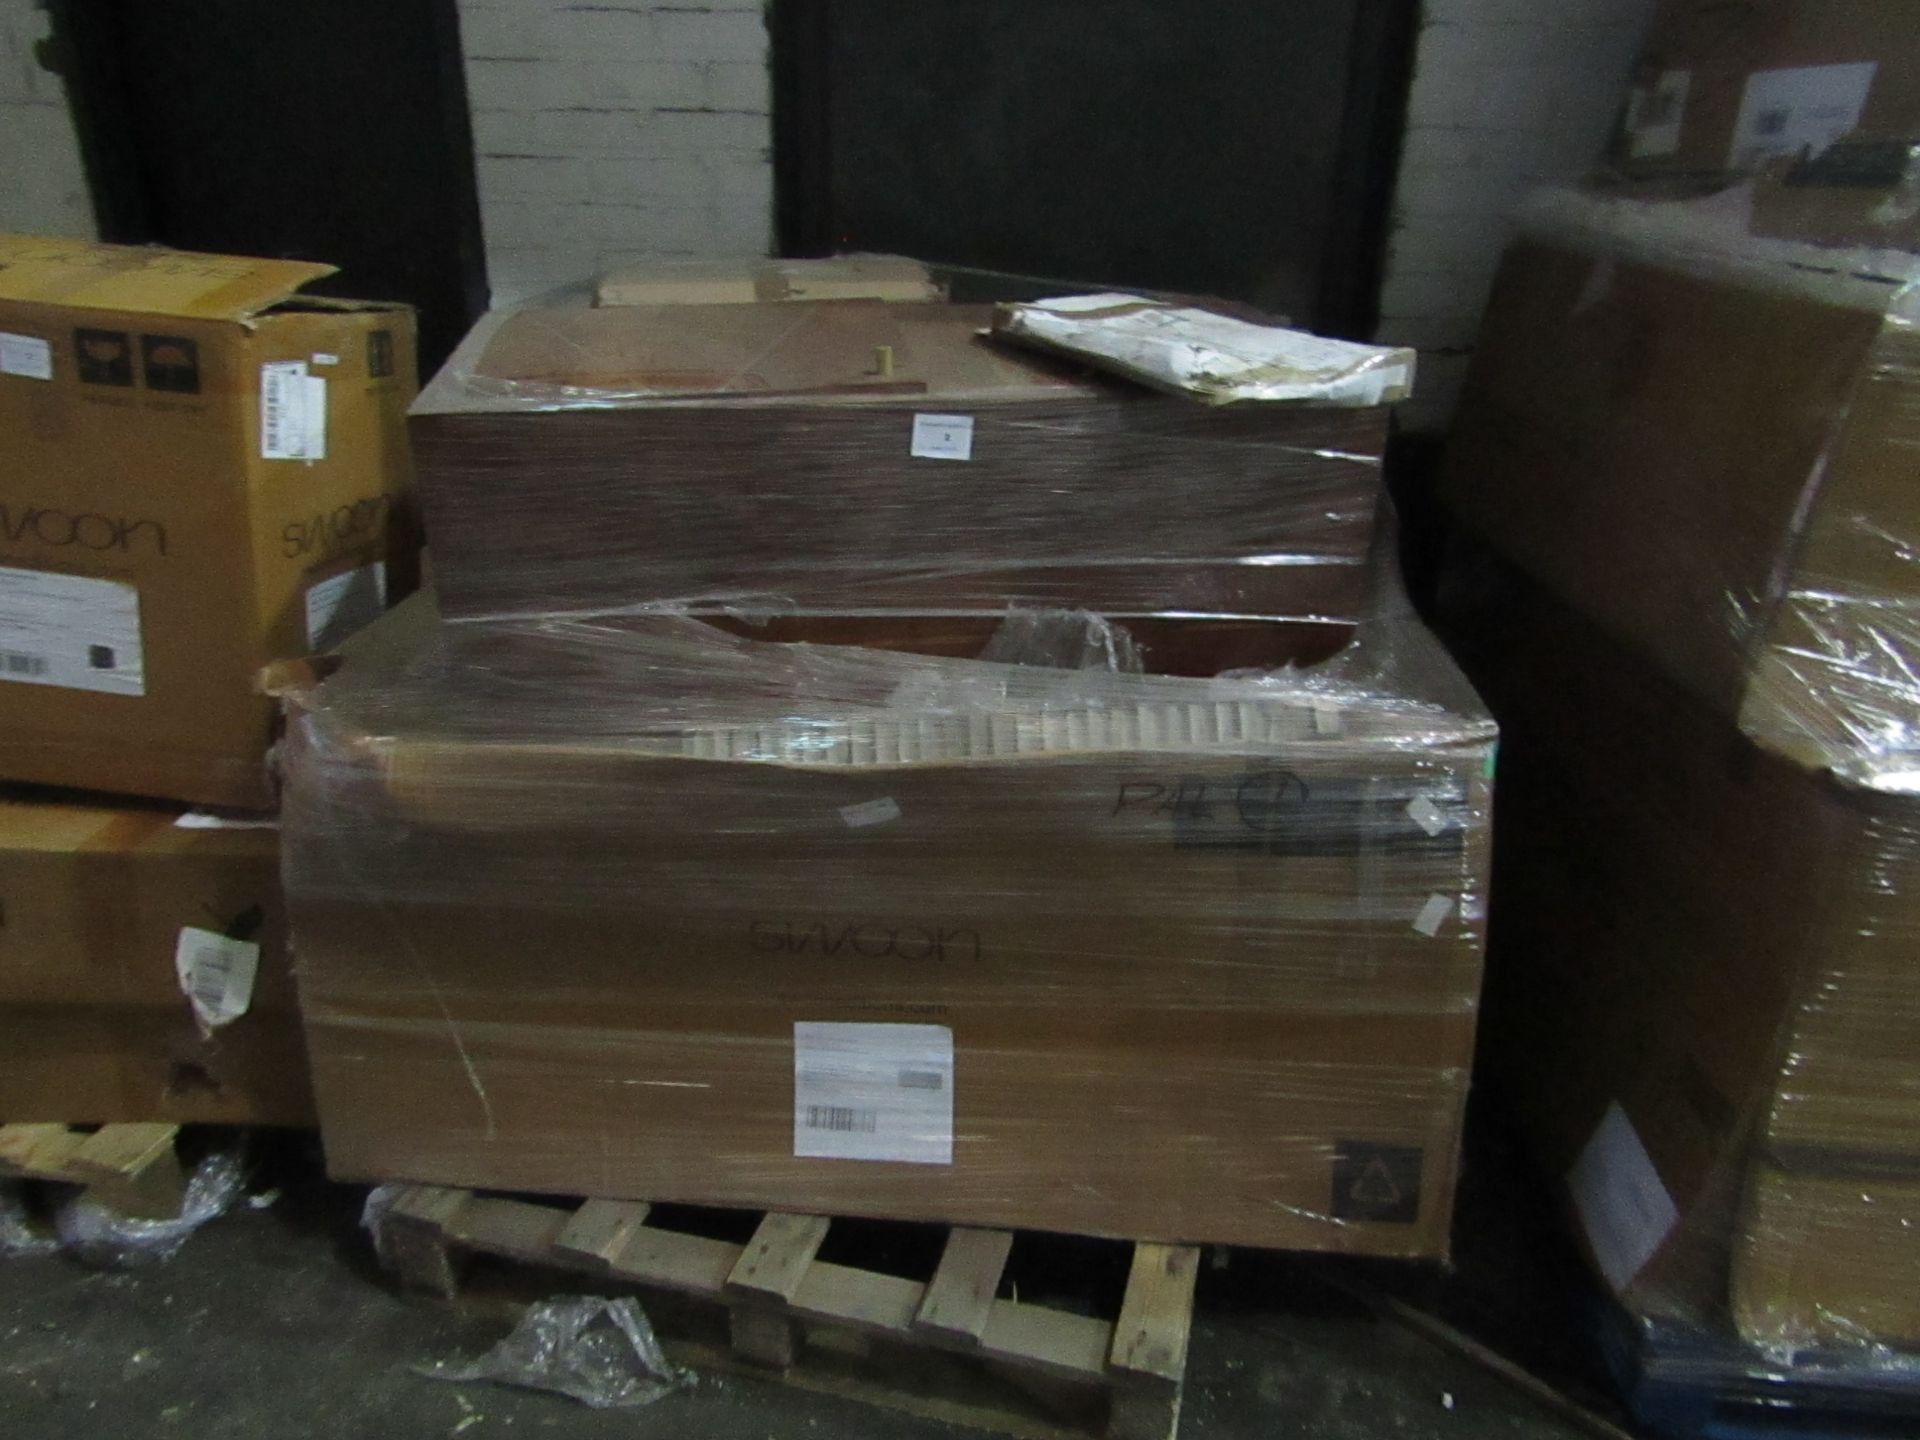 | 1X | PALLET OF SWOON B.E.R FURNITURE, UNMANIFESTED, WE HAVE NO IDEA WHAT IS ON THESE PALLETS OR